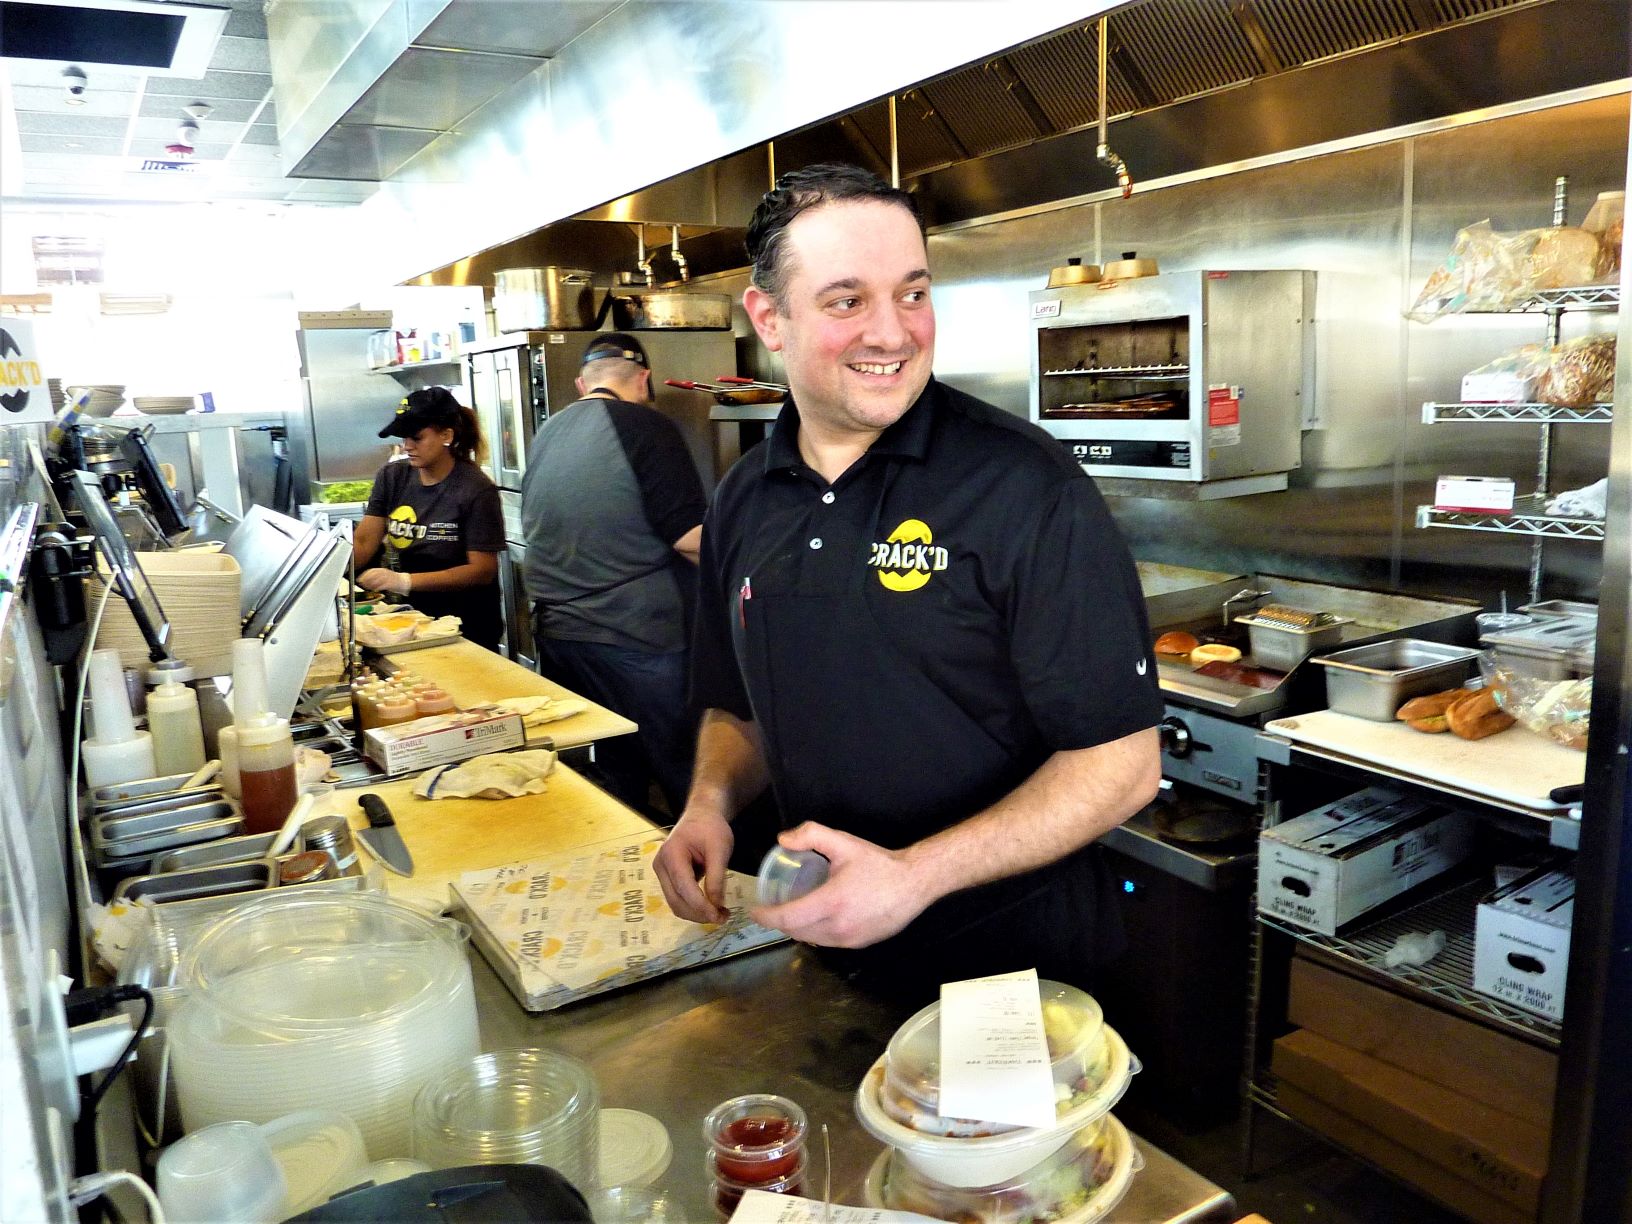 CRACK'D co-founder Danny Azzarello works the kitchen at his restaurant in Andover, Mass.